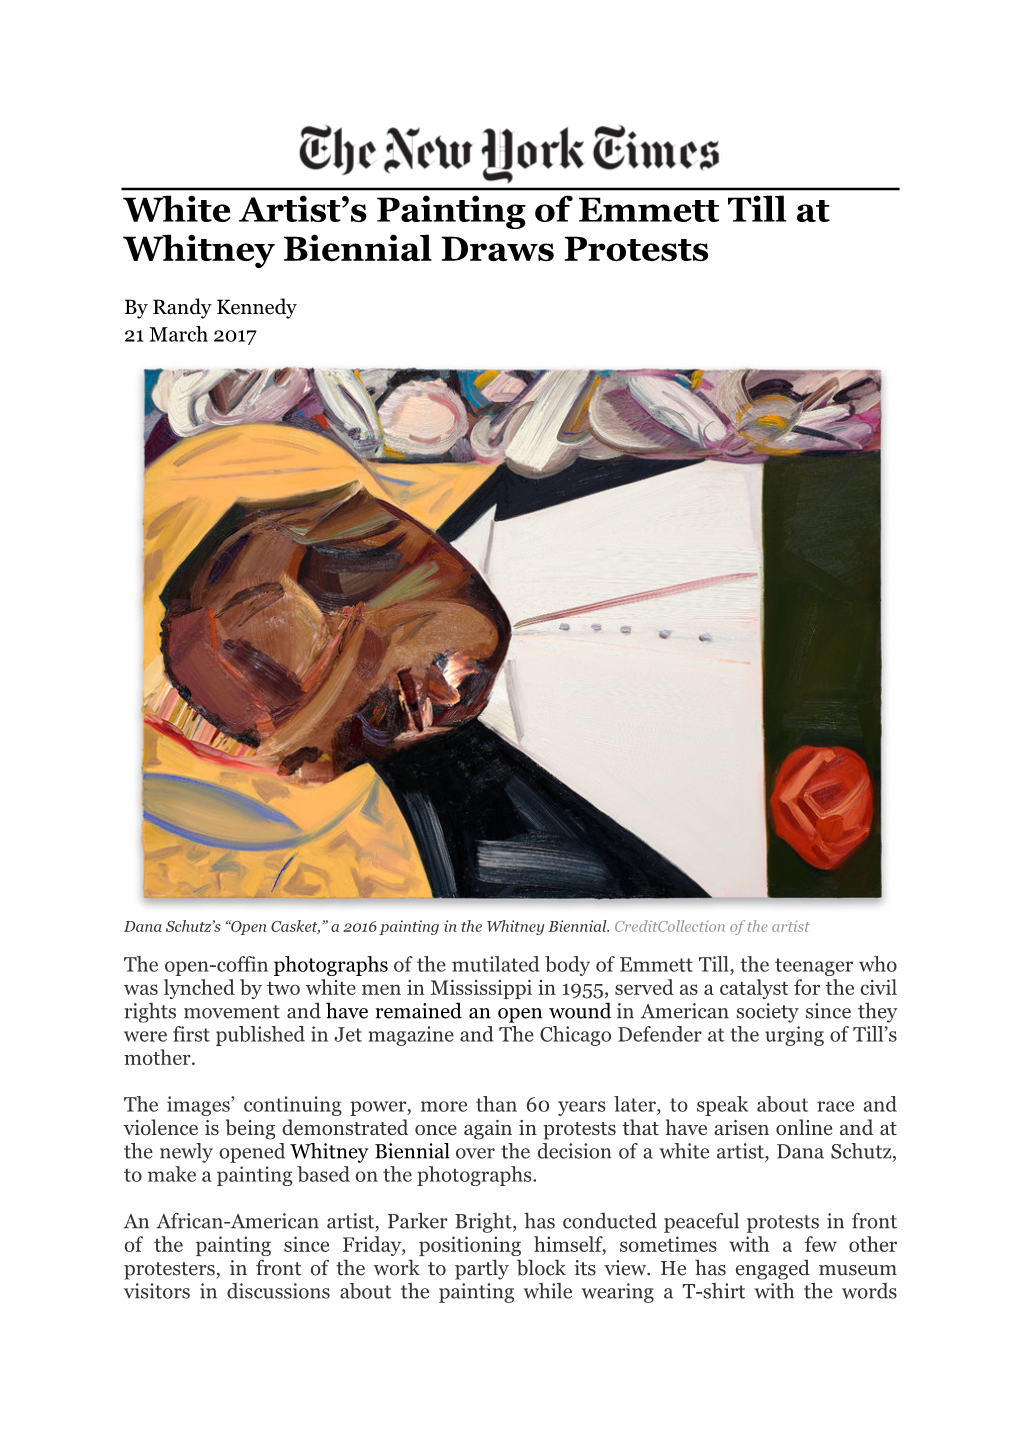 White Artist's Painting of Emmett Till at Whitney Biennial Draws Protests